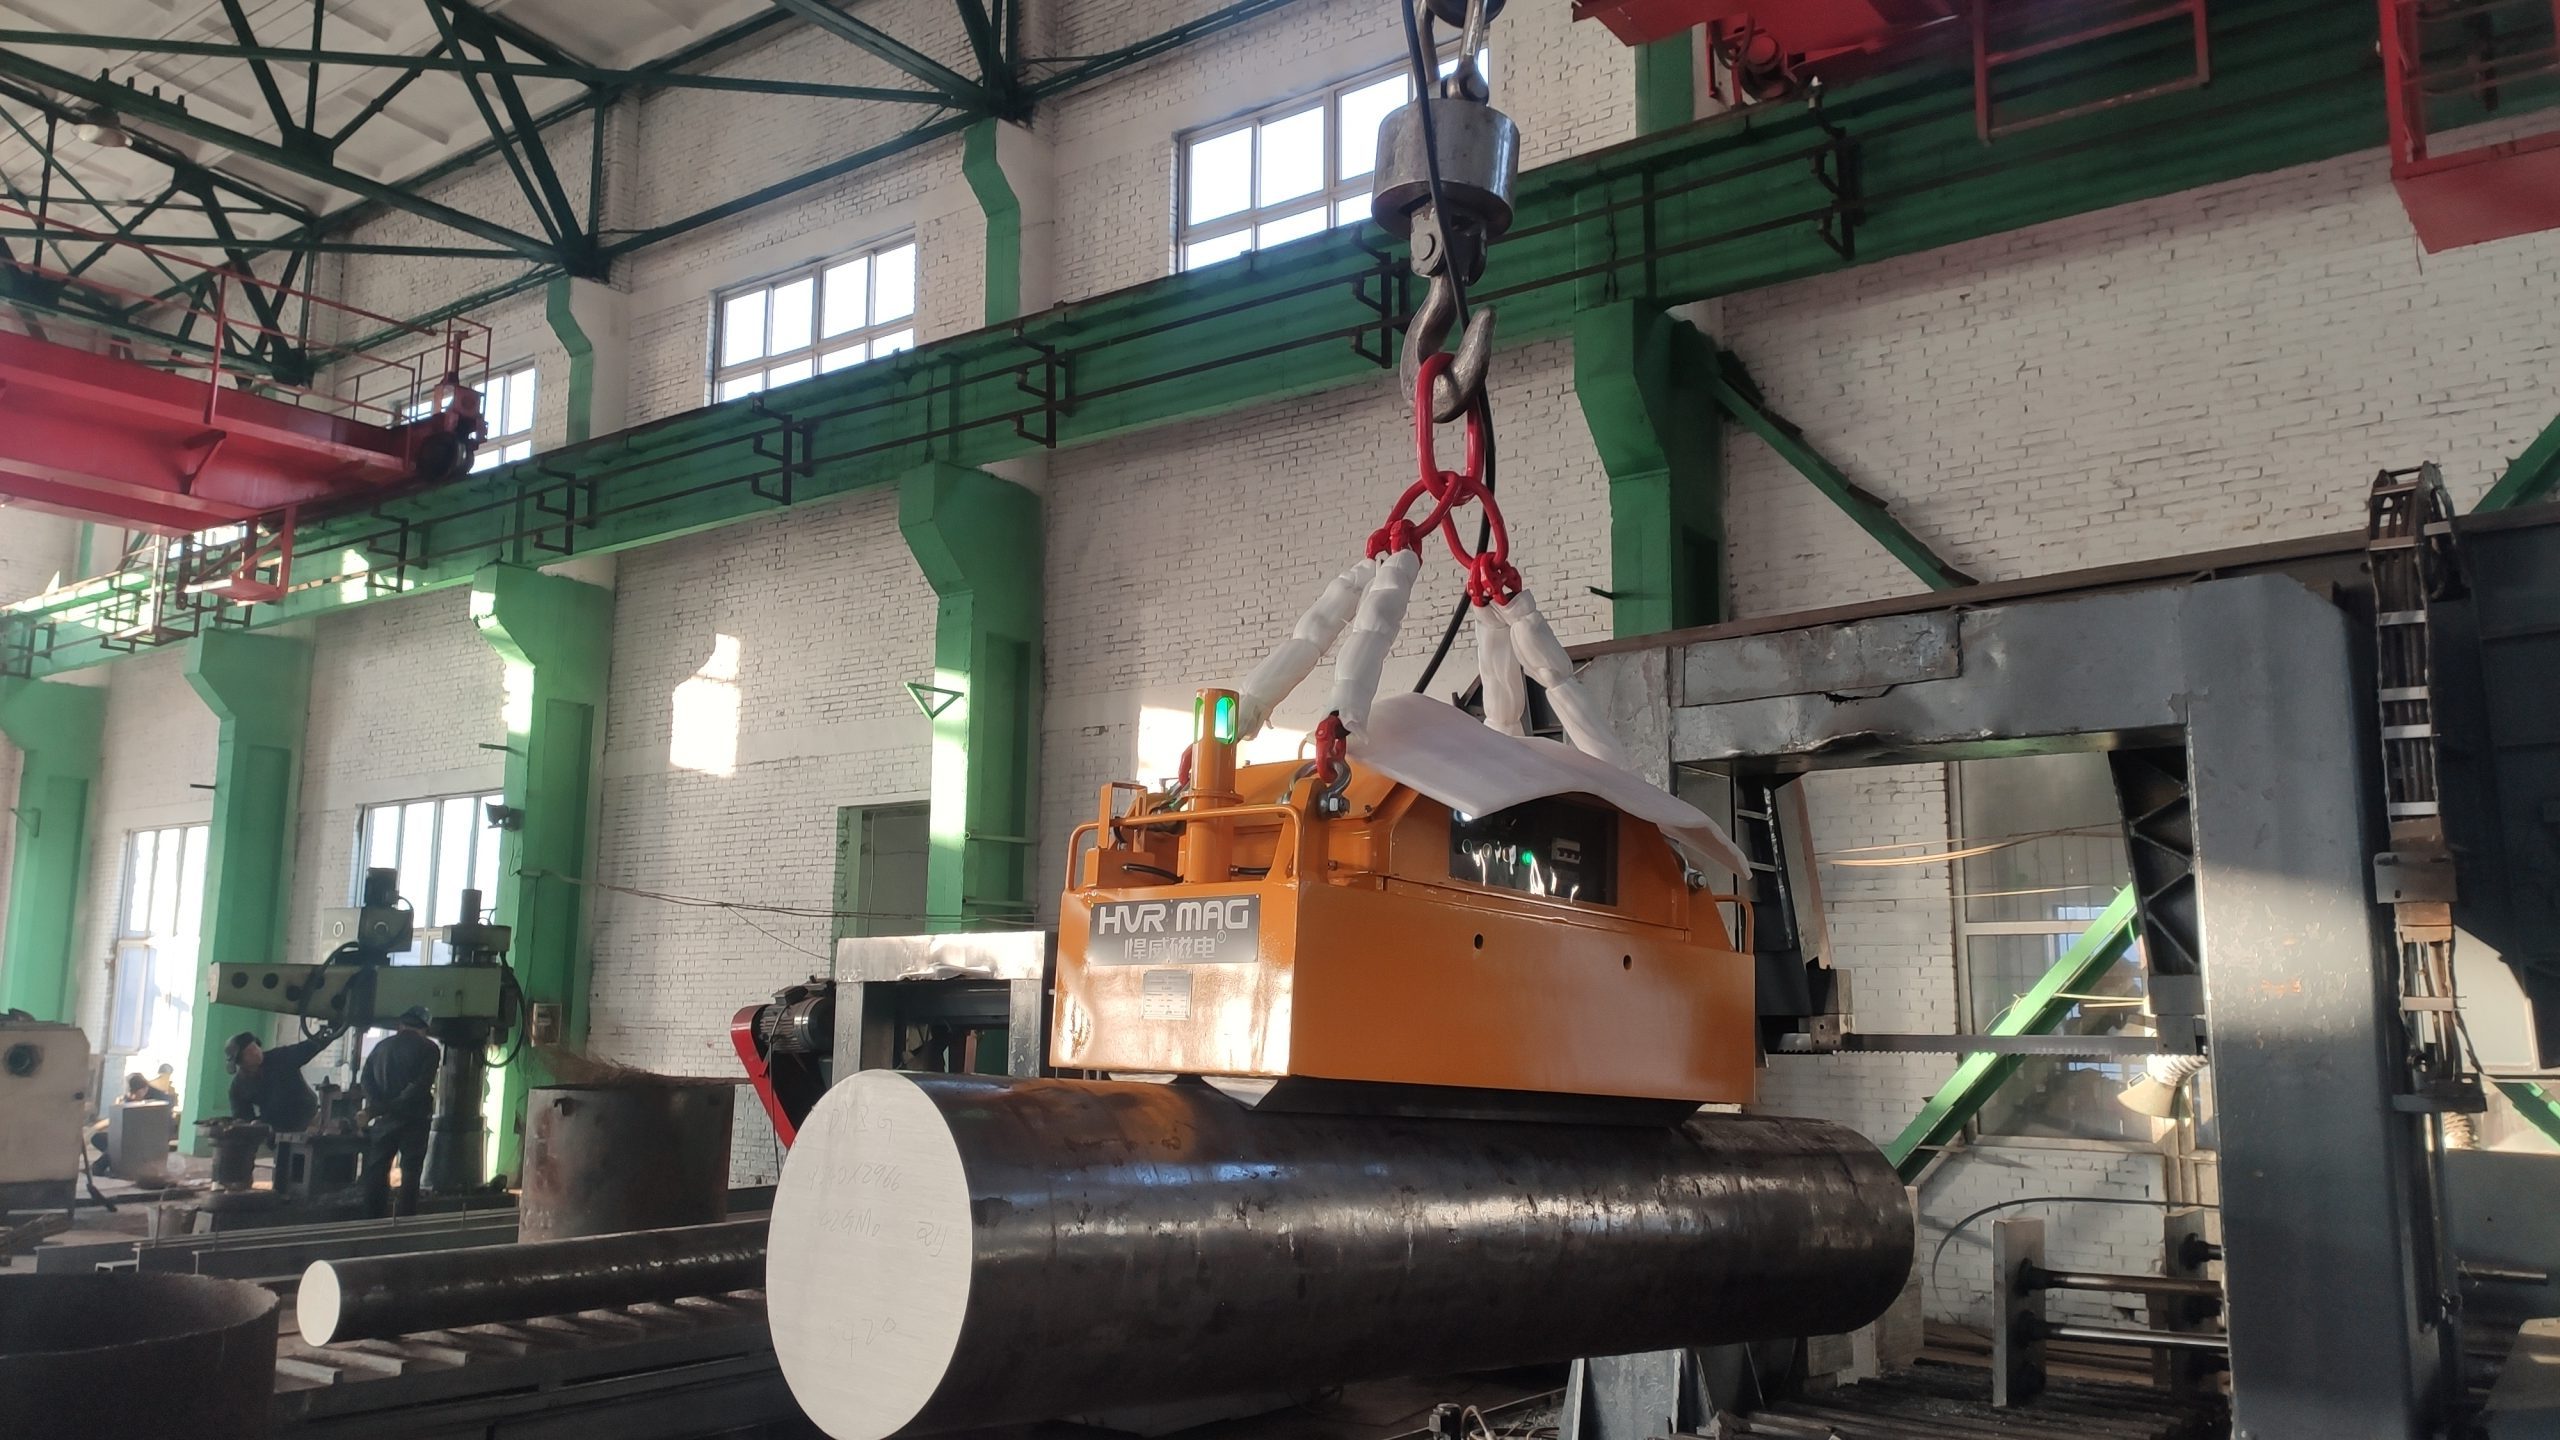 Below the hook lifting device for Steel Rod - magnetic lifter